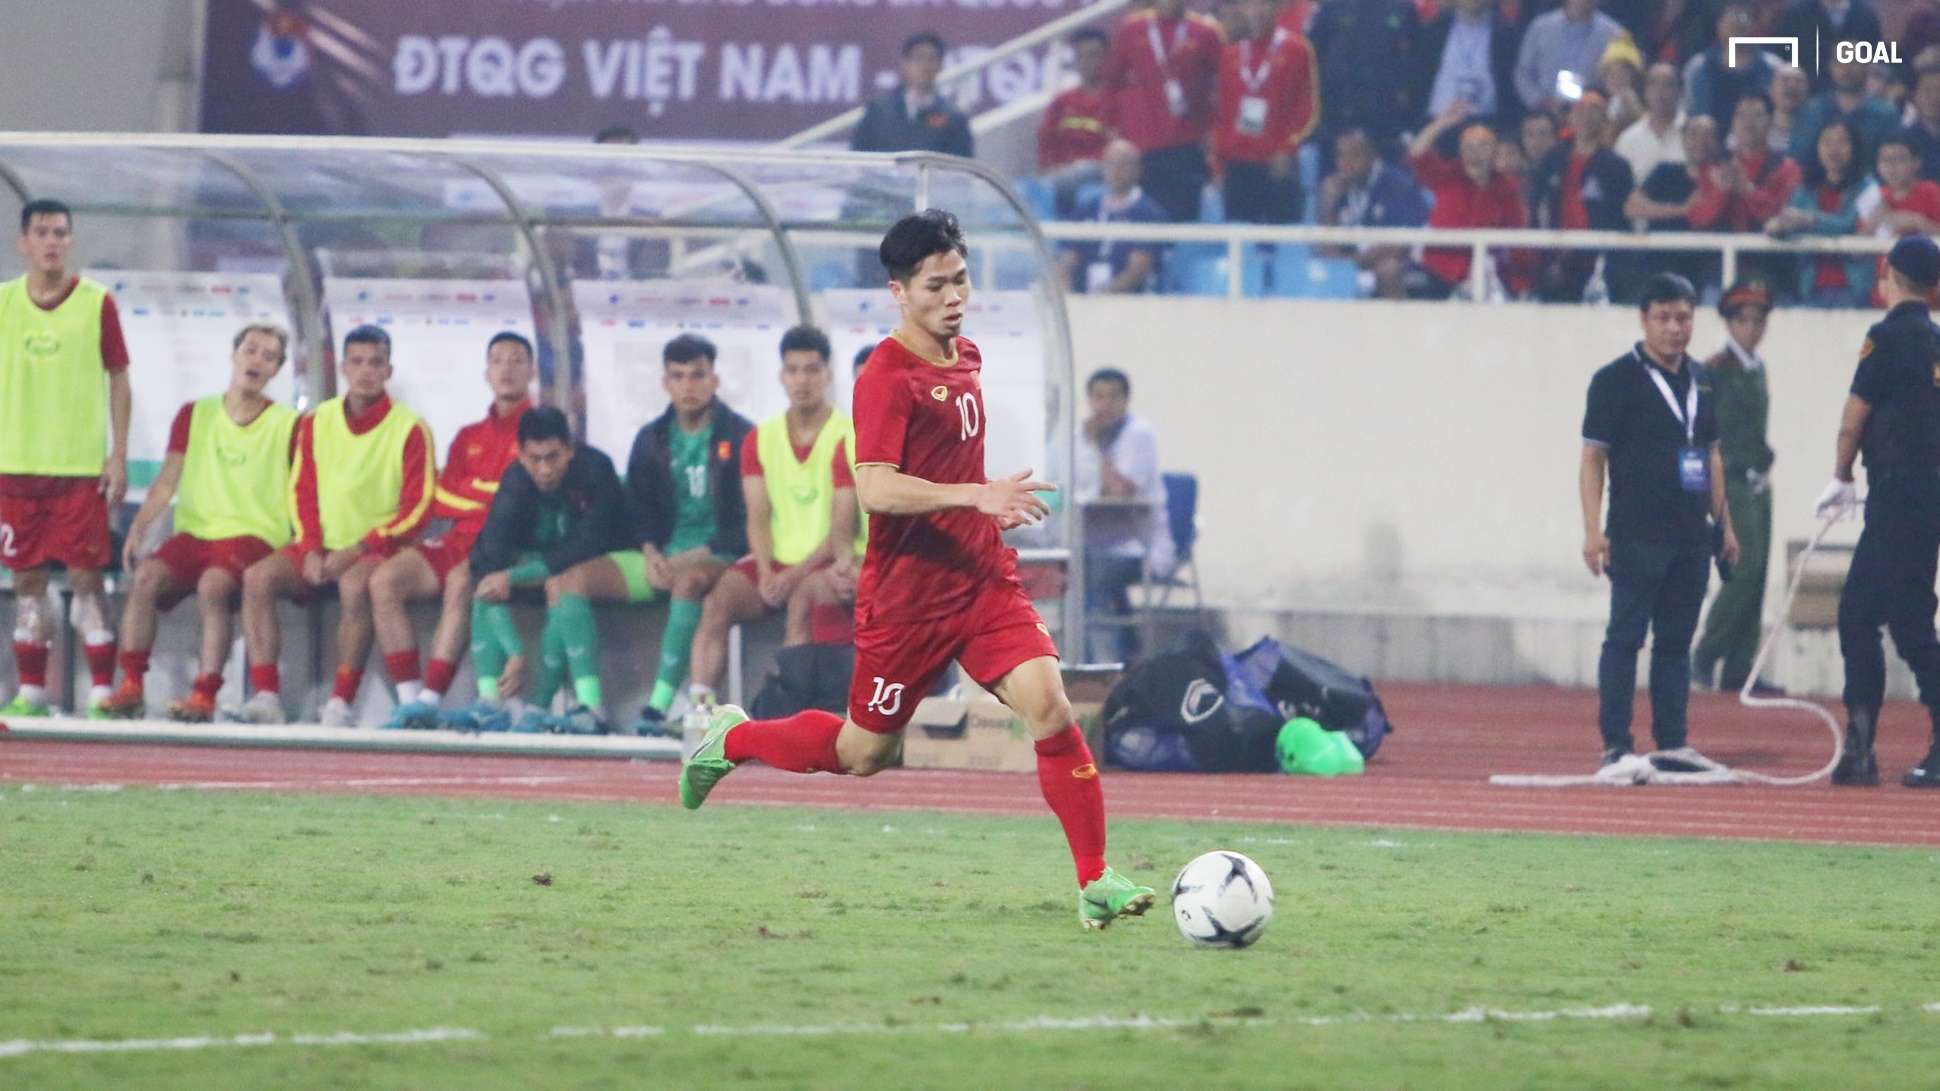 Nguyen Cong Phuong Vietnam vs UAE | 2022 FIFA World Cup qualification (AFC)